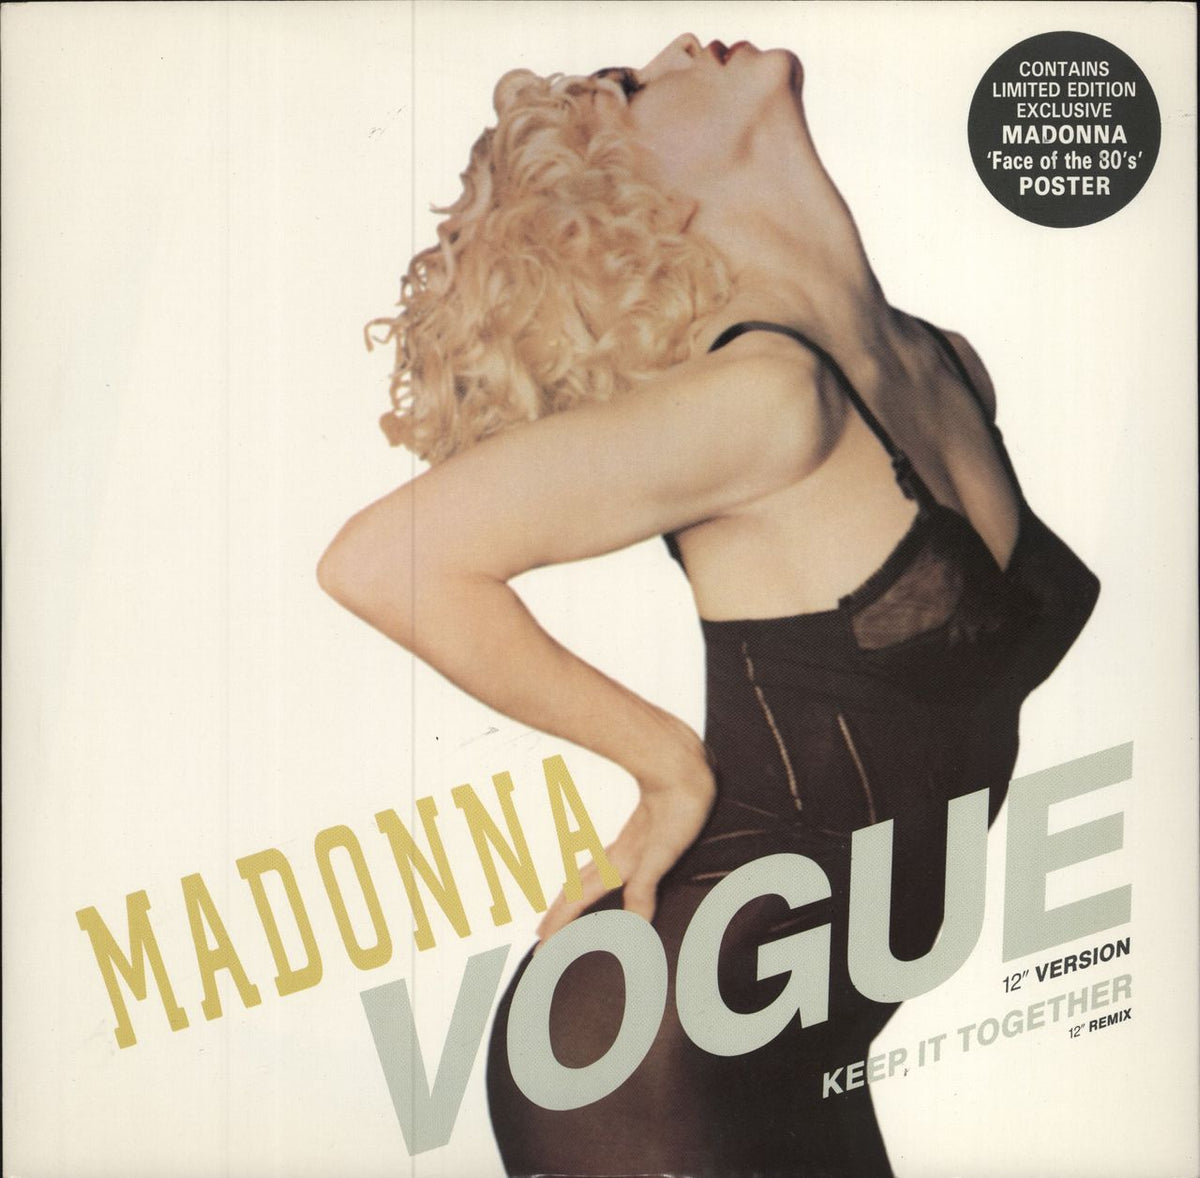 Madonna Vogue + Face Of The 80s Poster UK 12